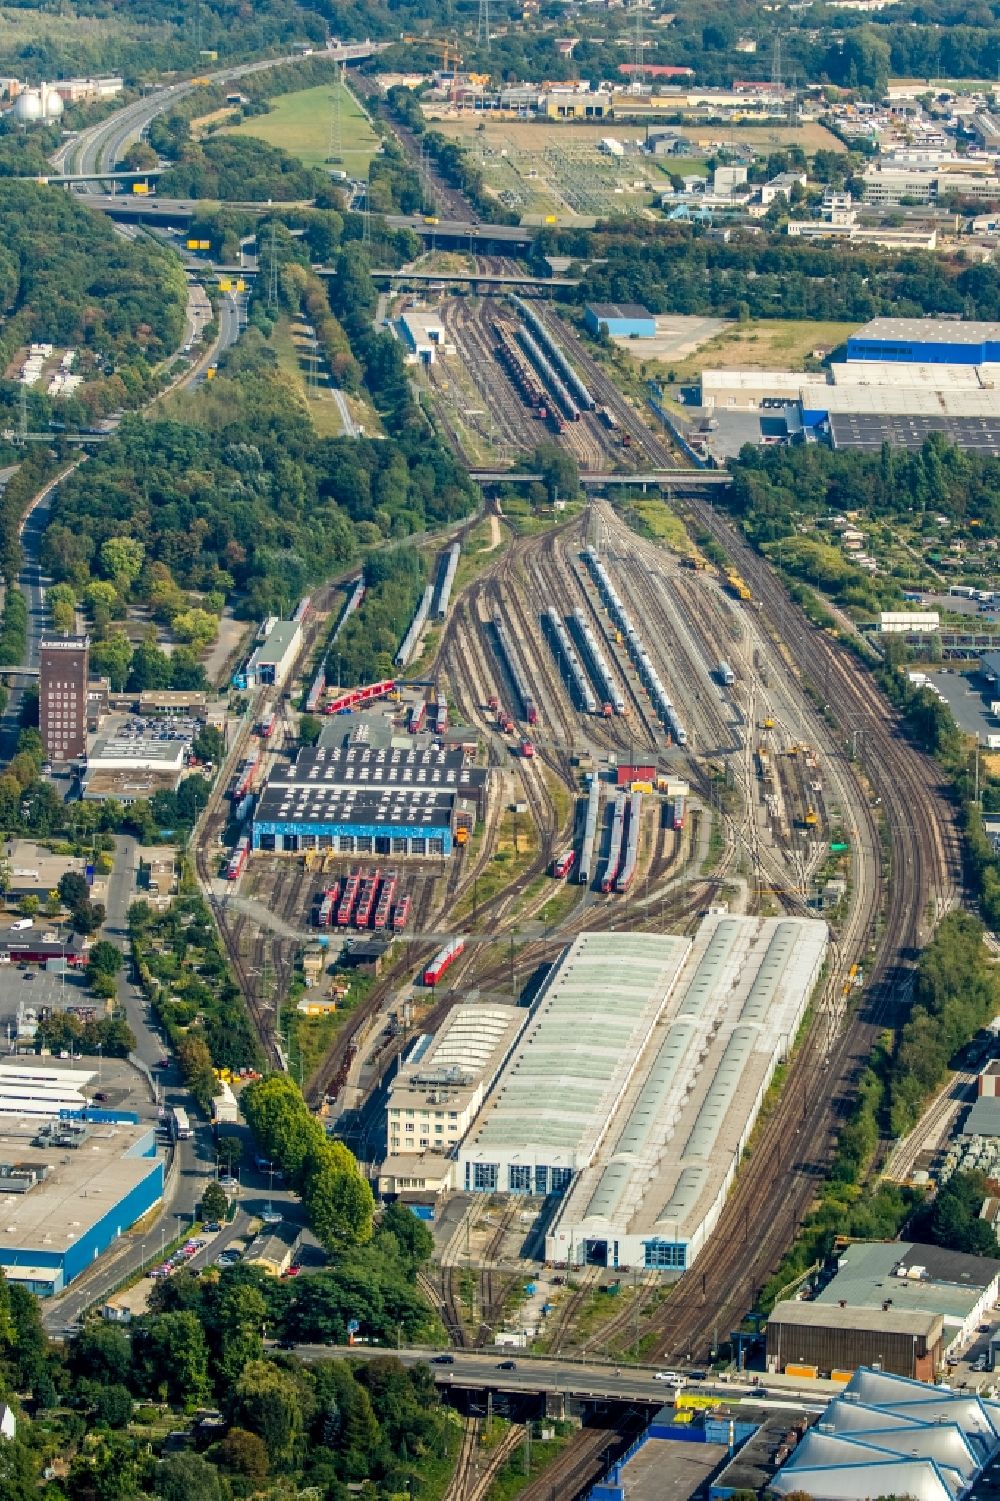 Dortmund from above - Marshalling yard and freight stations of the depot station of the Deutsche Bahn in Dortmund in the state of North Rhine-Westphalia